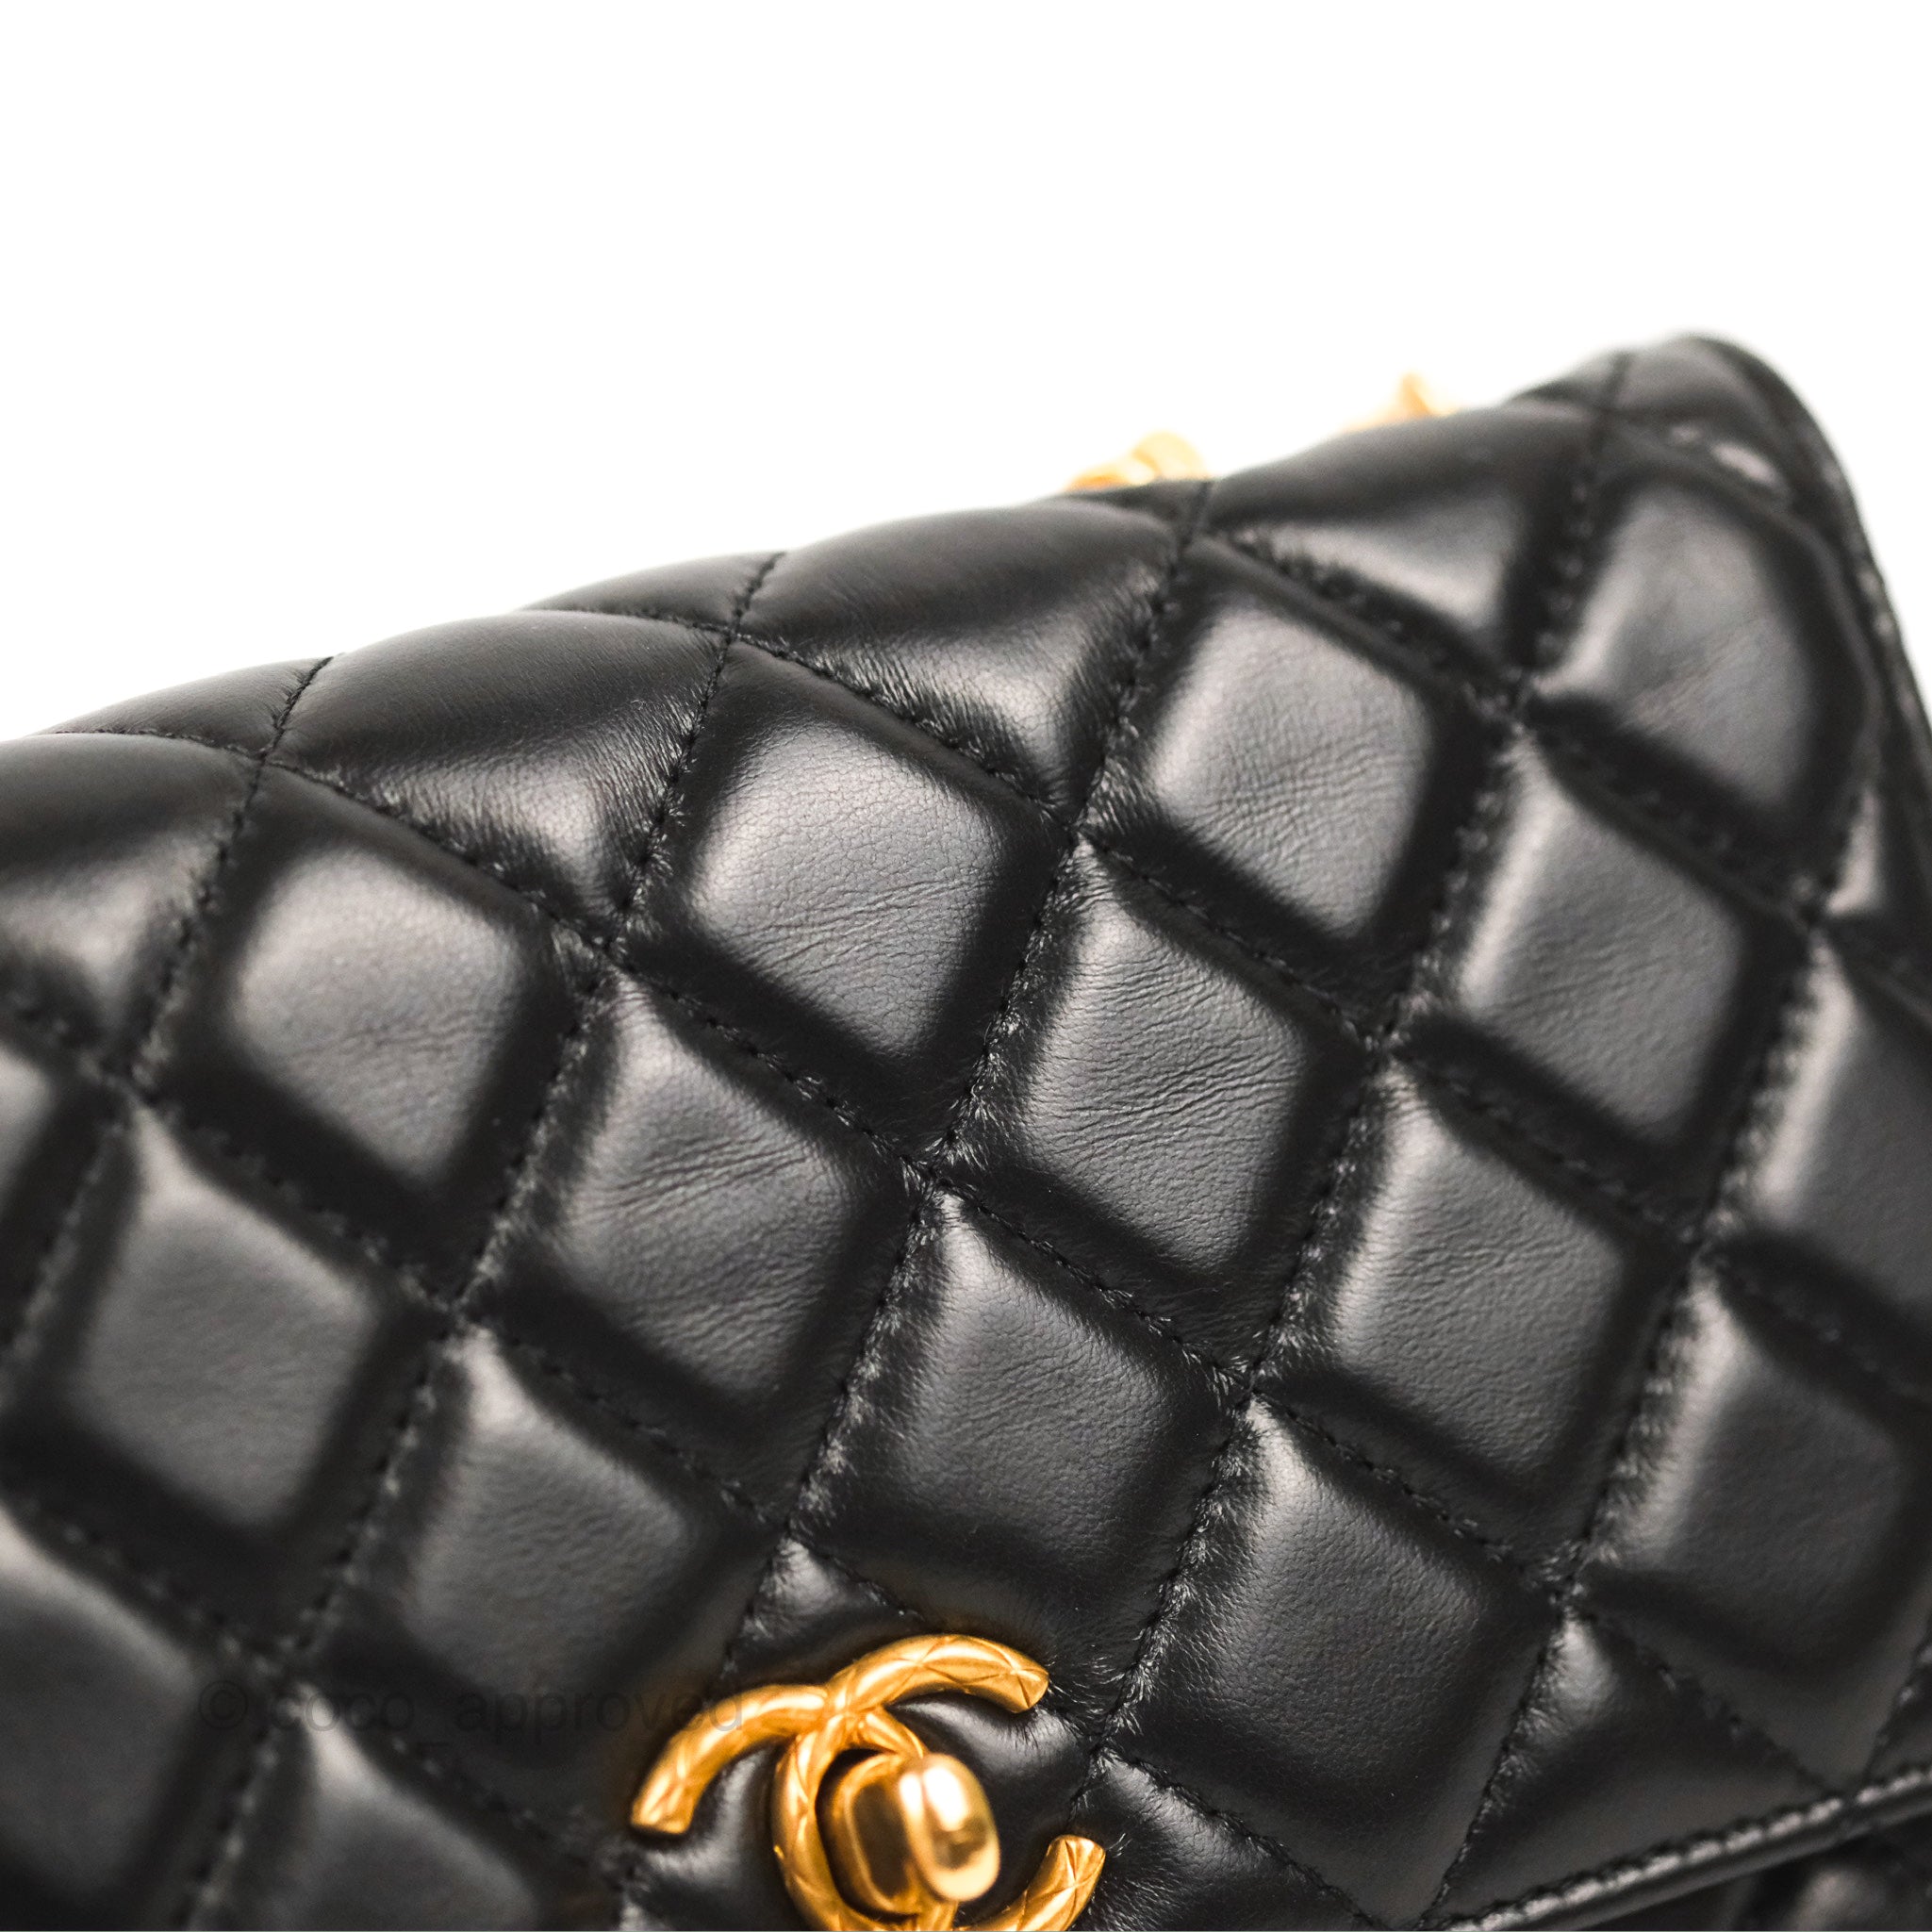 CHANEL 22K Dark Beige Caviar Twirling CC Wallet On Chain Gold Hardware –  AYAINLOVE CURATED LUXURIES